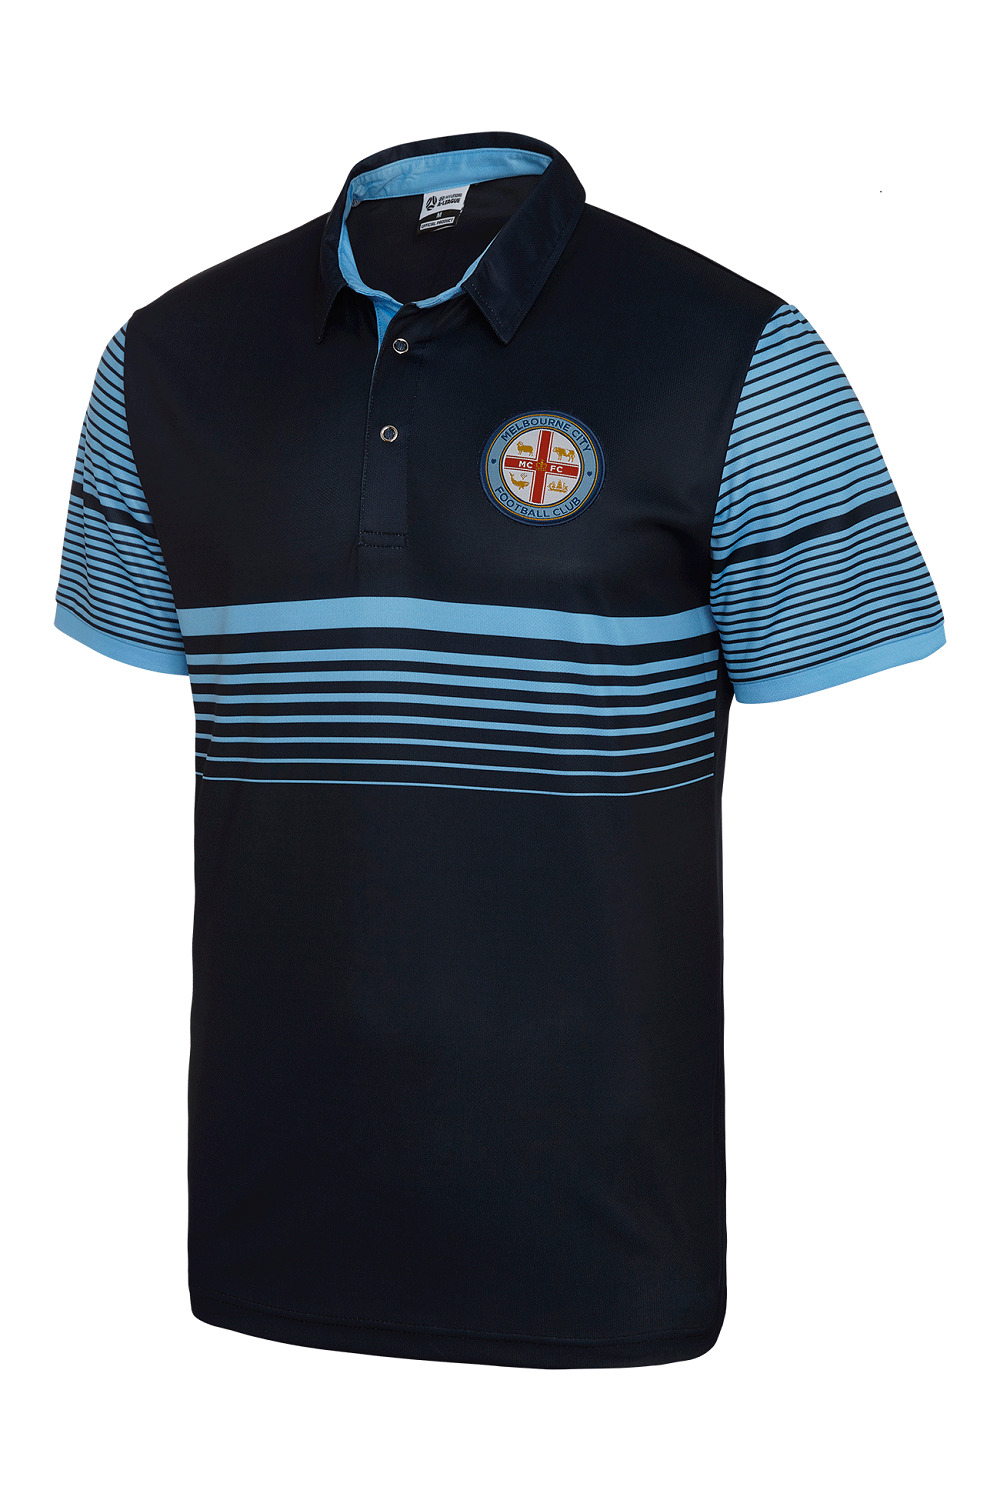 A League Soccer Football! Melbourne City FC Knitted Polo Shirt Size S-5XL 